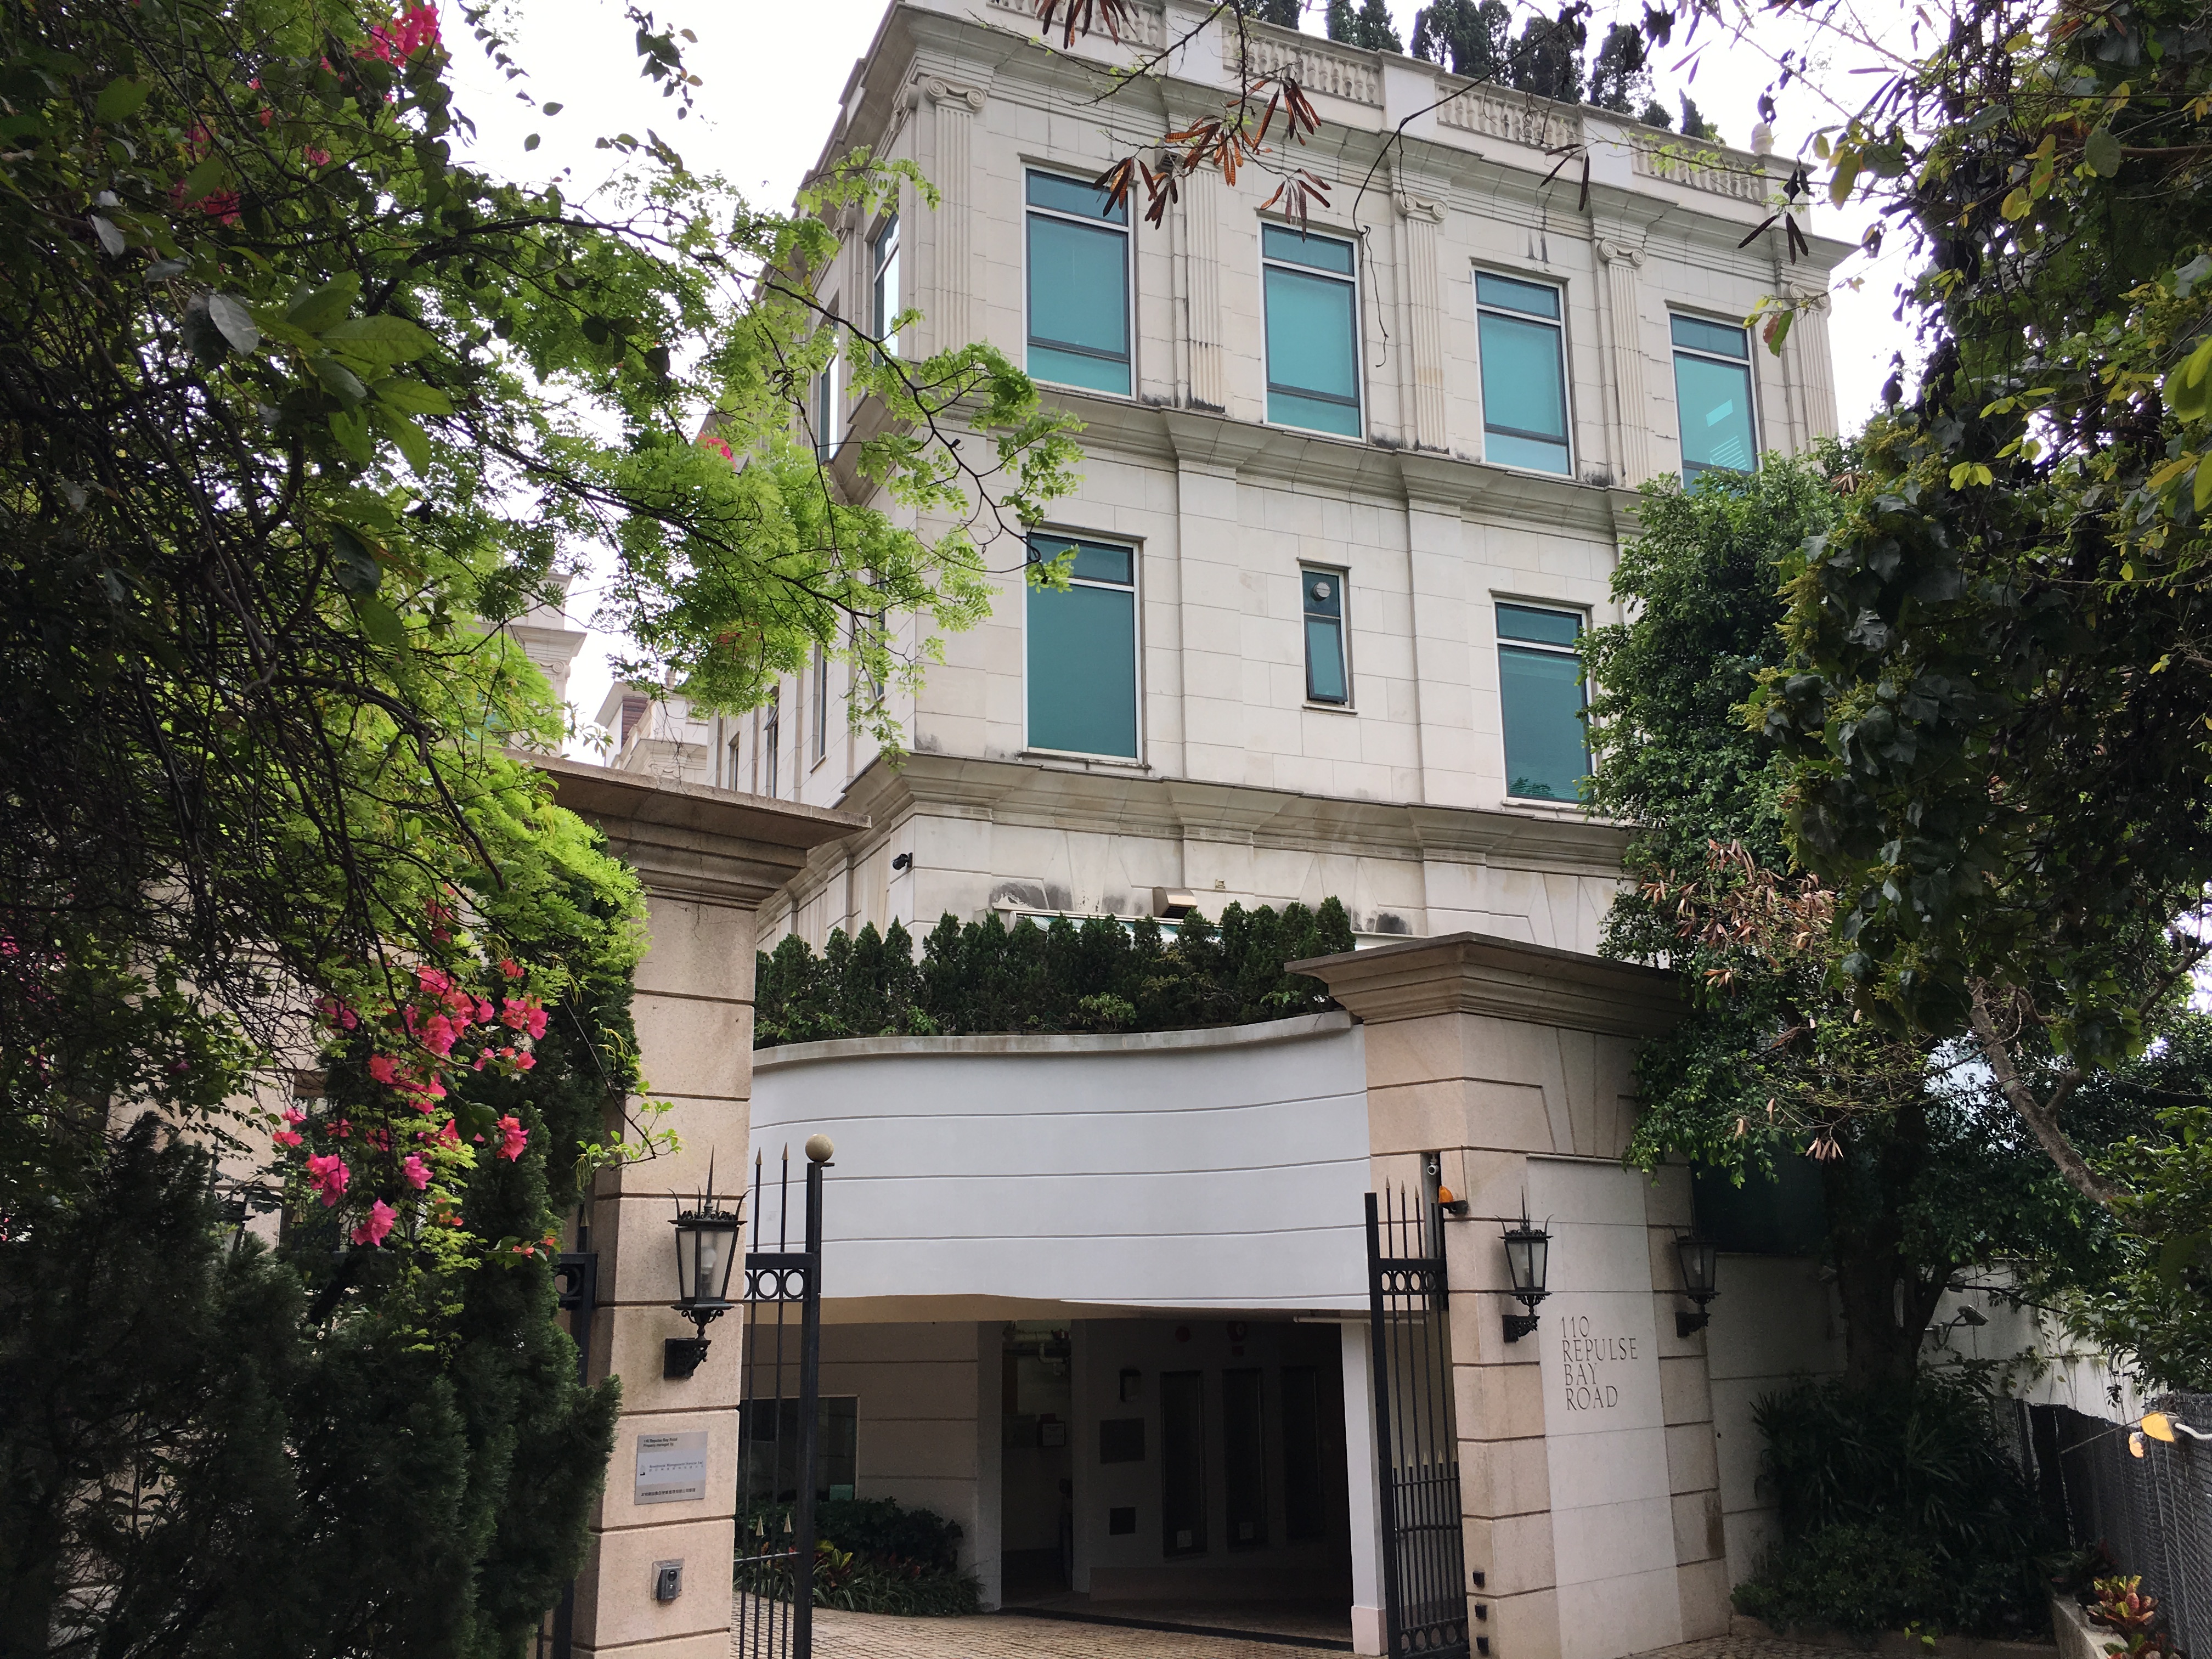 The exterior of 110 Repulse Bay Road, Hong Kong. One of the houses at this address has a staggering $87 million asking price, or over $21,000 per square foot (Kevin Lui)